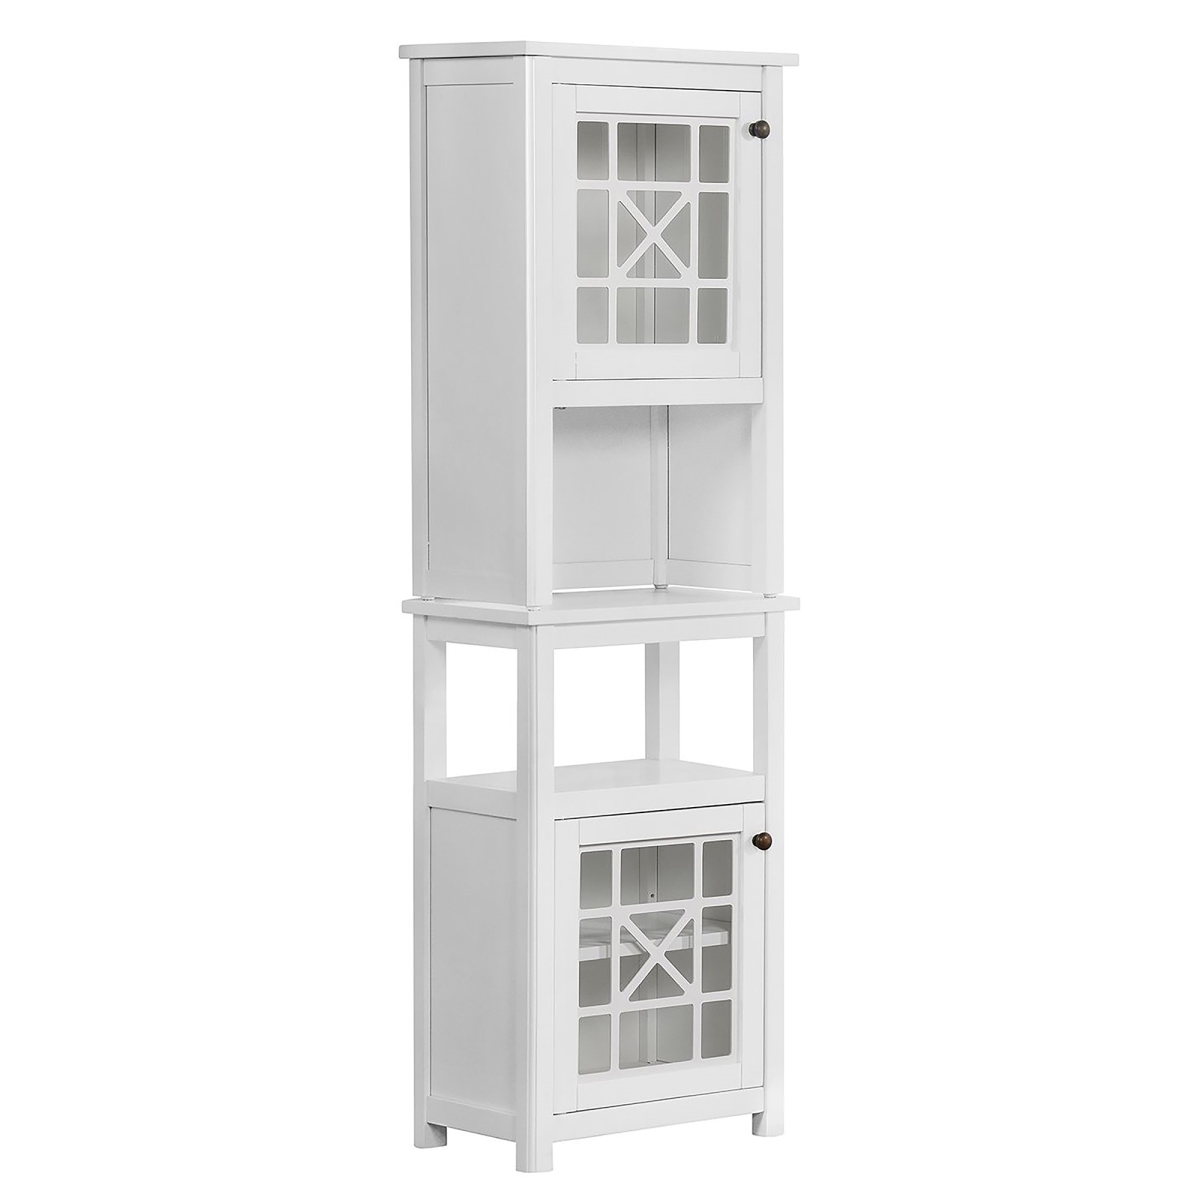 Picture of Alaterre ANDE7879WH Derby Bath Deluxe Storage Cabinet with Hutch